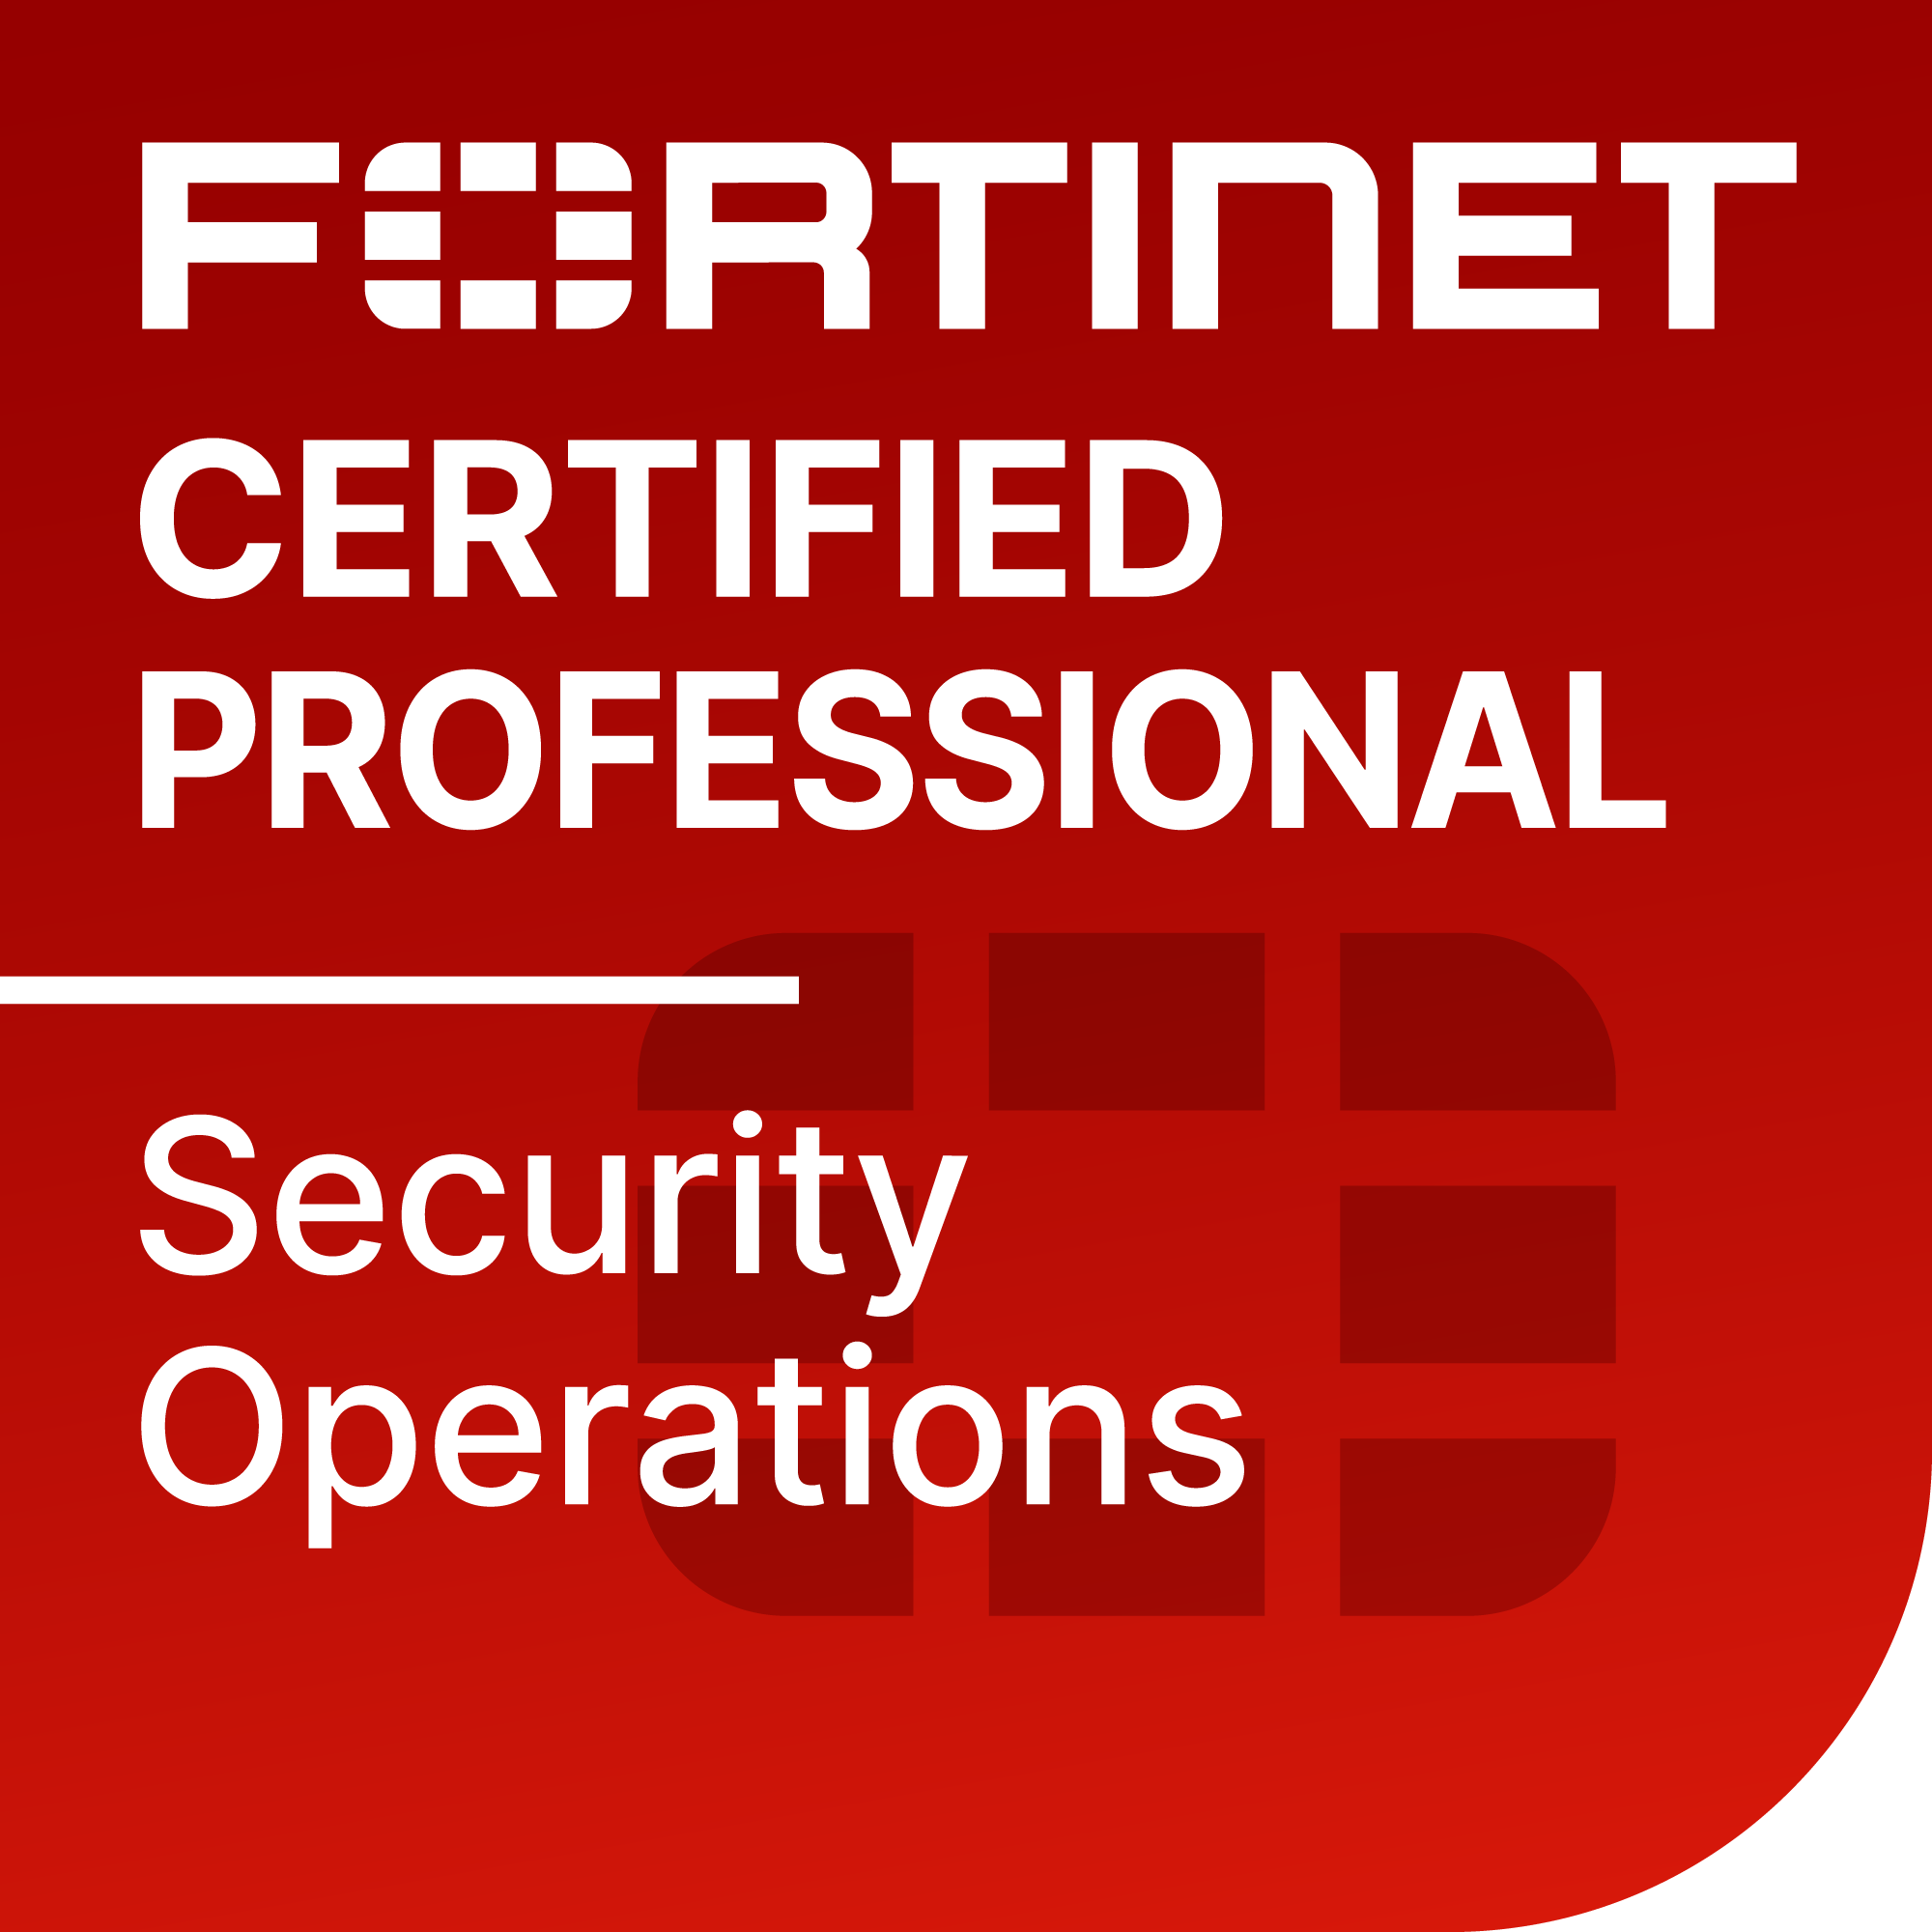 Fortinet Certified Professional Security Operations badge